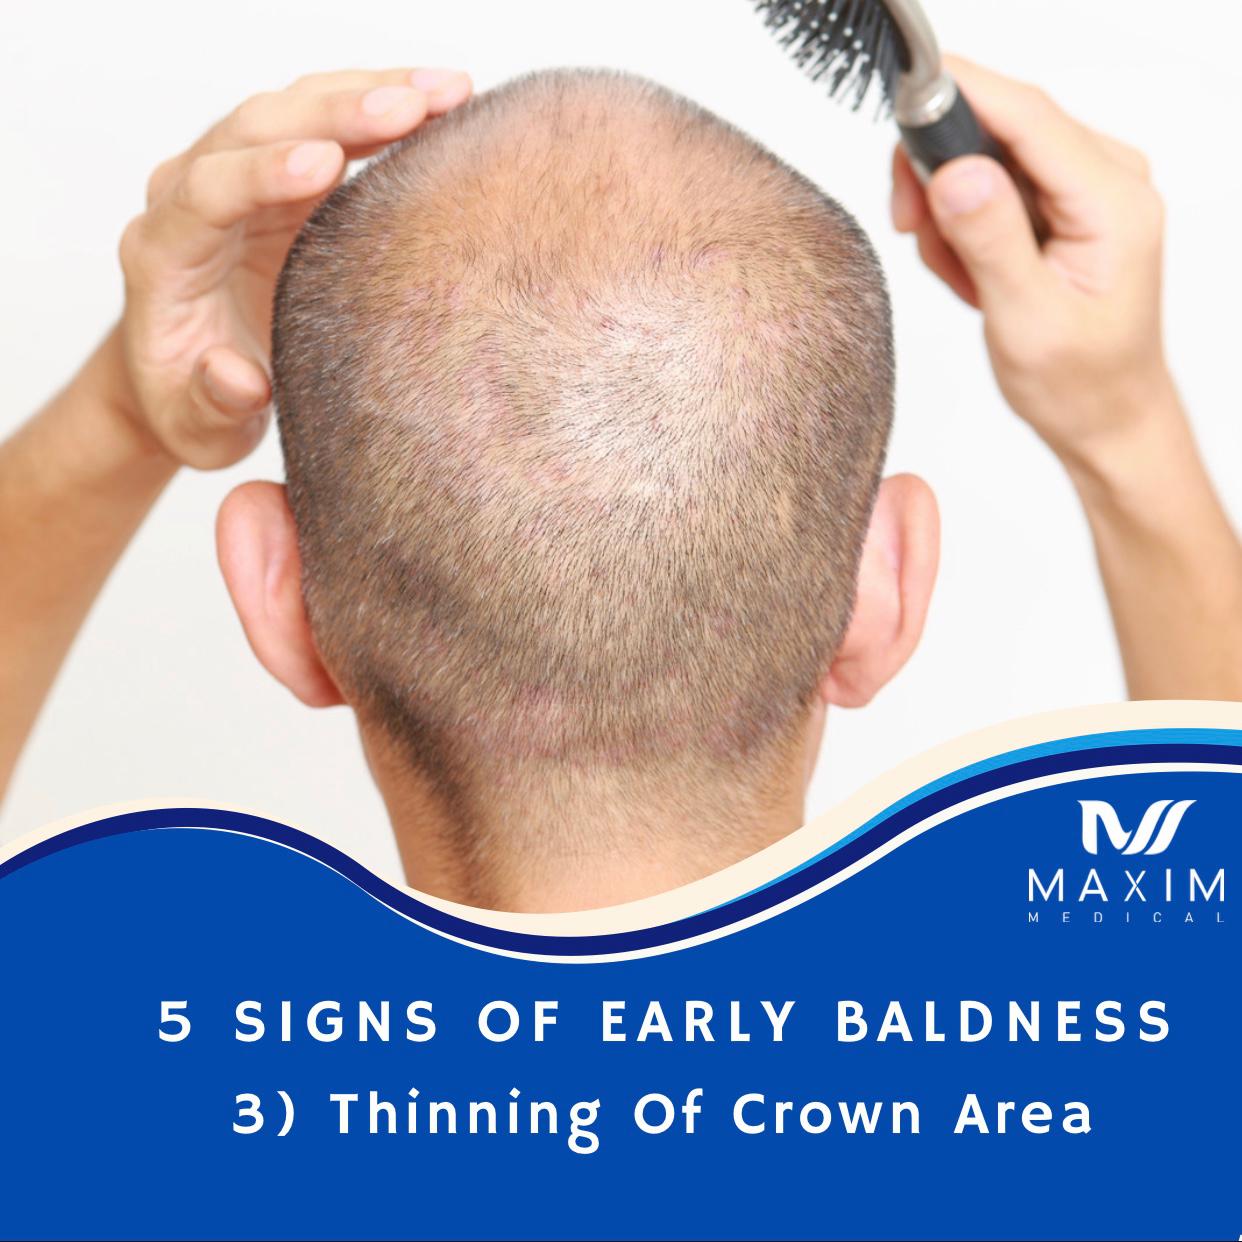 5 Early Signs You May Be Going Bald

3. Thinning Of Crown Area
Another common characteristic of Male Pattern Baldness is if you notice thinning in the crown area of your hair. Aside from your frontal hairline and temple area, the crown is a main result of MPB. In many cases this can occur even before thinning hair in front. Not all people go bald from their hairline. Some men experience what's called diffuse thinning. This is a type of hair loss that either affects the entire scalp or specific areas like the crown...